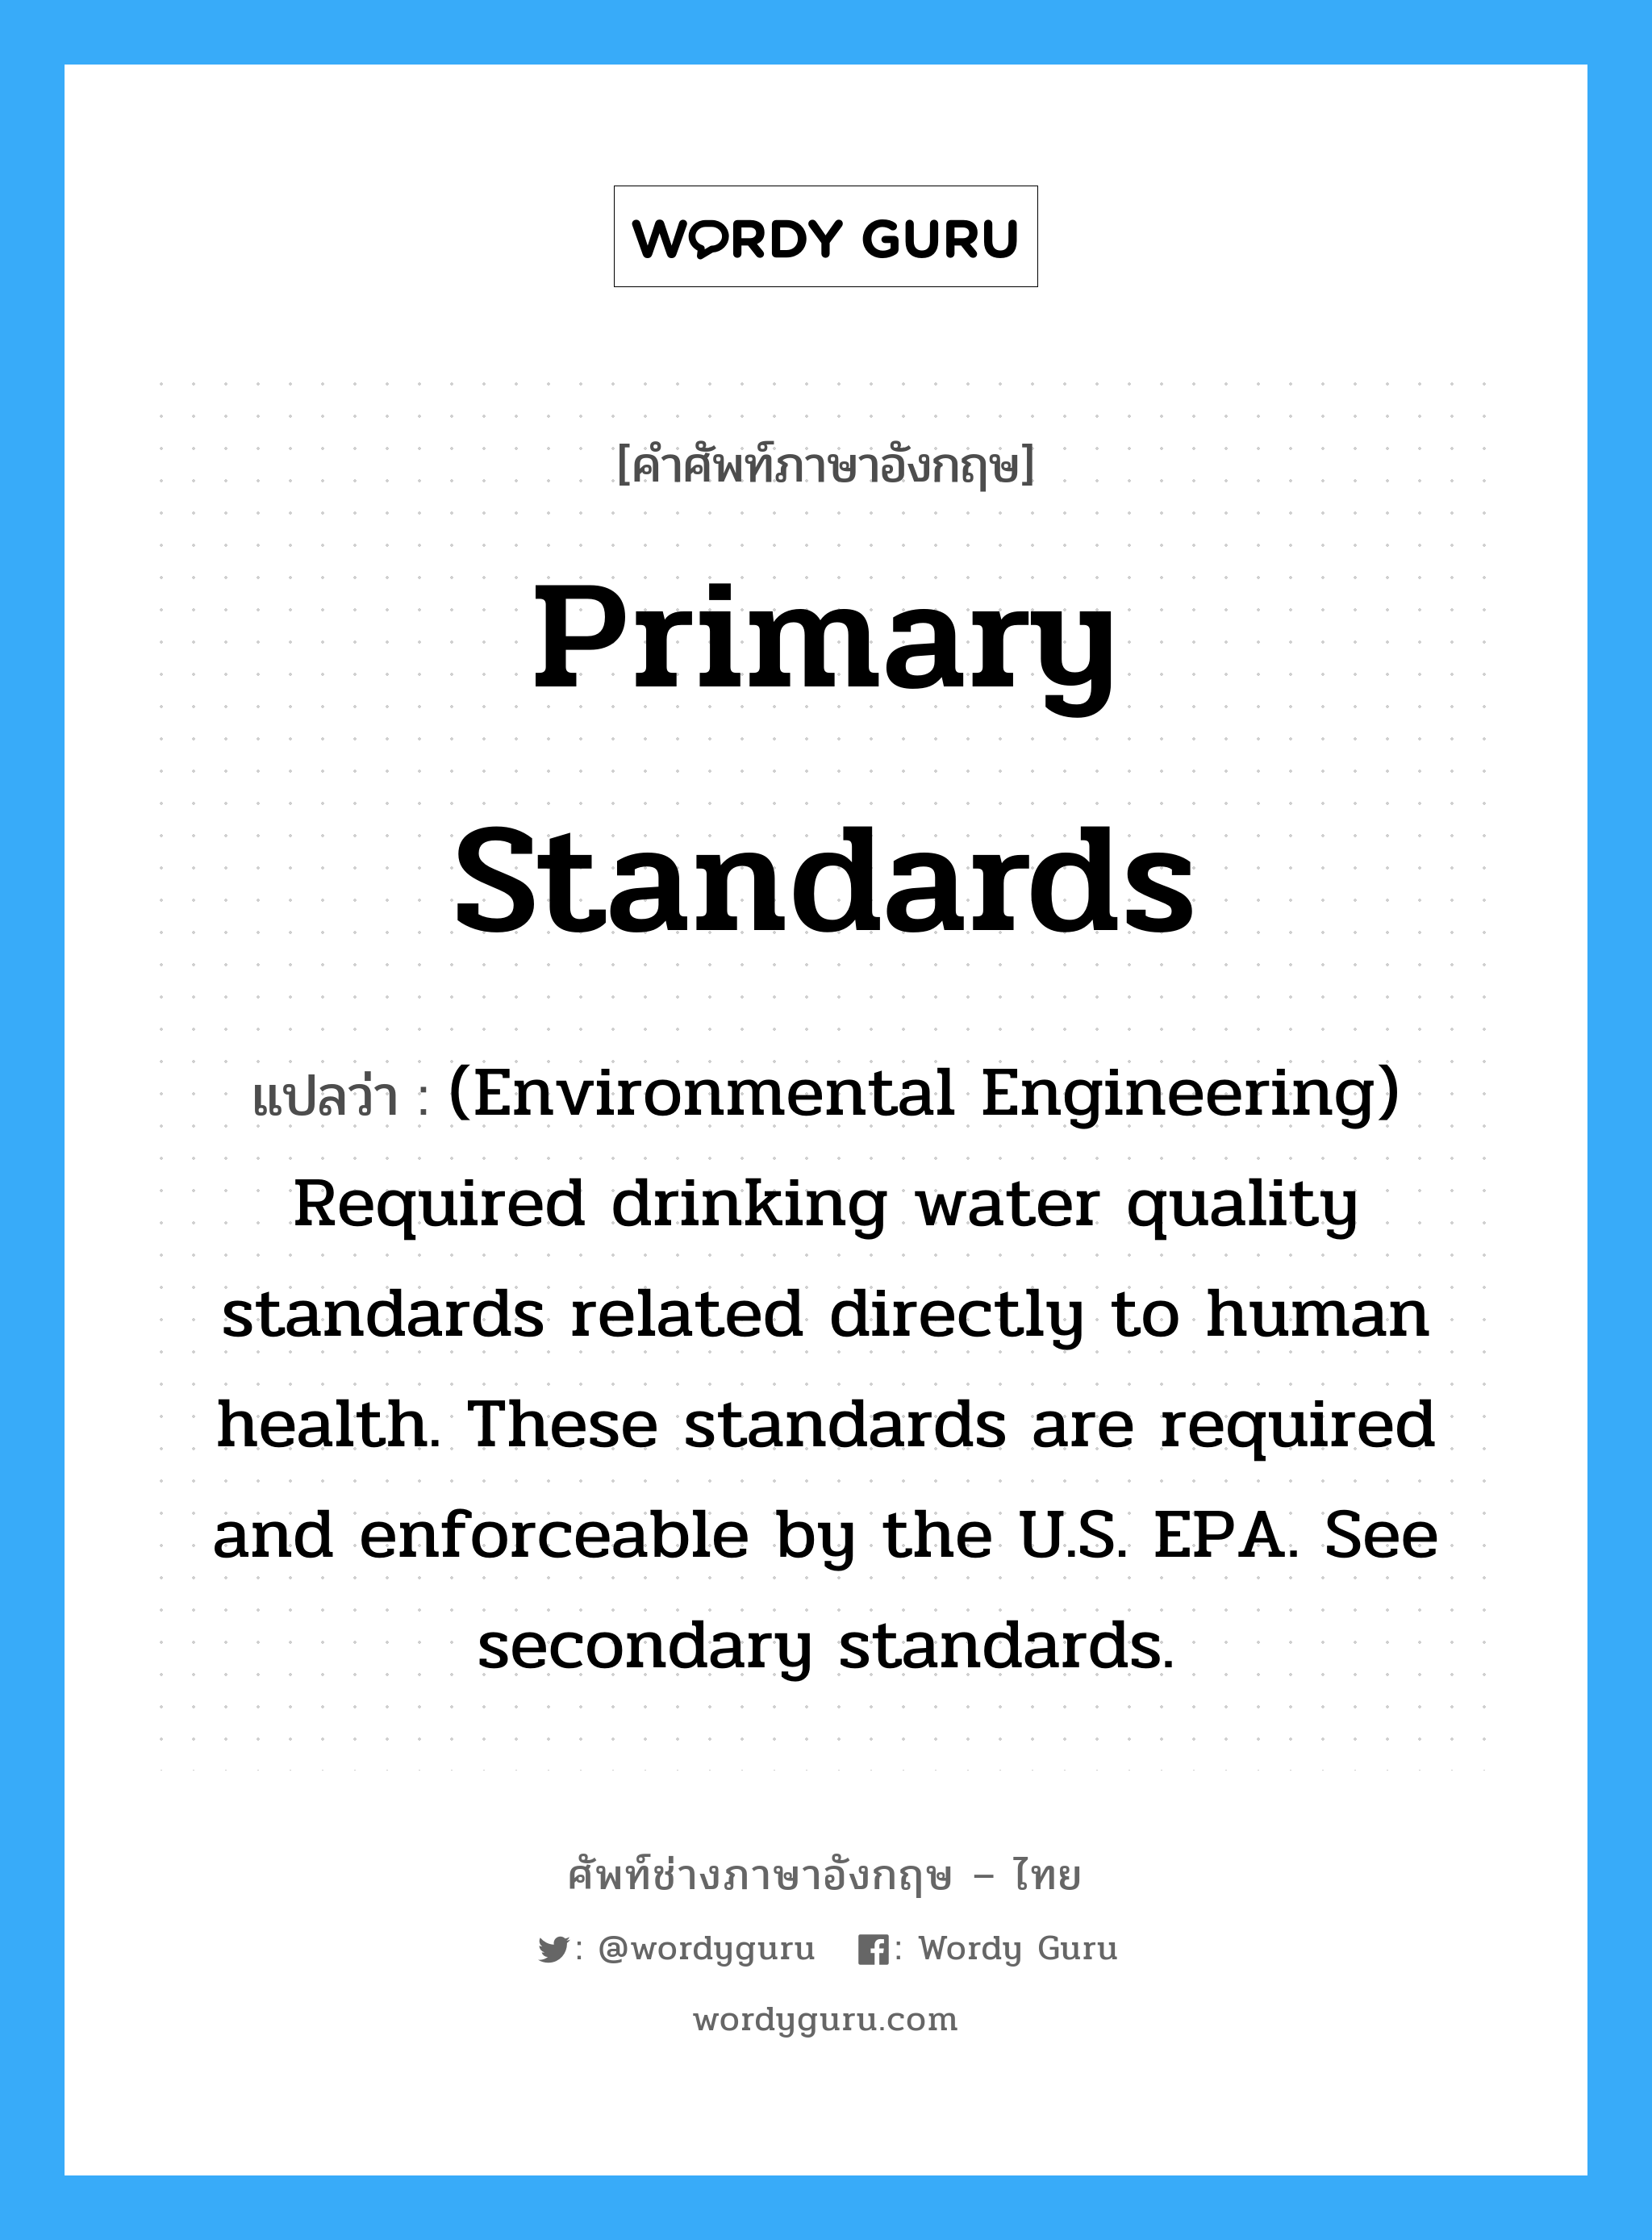 Primary standards แปลว่า?, คำศัพท์ช่างภาษาอังกฤษ - ไทย Primary standards คำศัพท์ภาษาอังกฤษ Primary standards แปลว่า (Environmental Engineering) Required drinking water quality standards related directly to human health. These standards are required and enforceable by the U.S. EPA. See secondary standards.